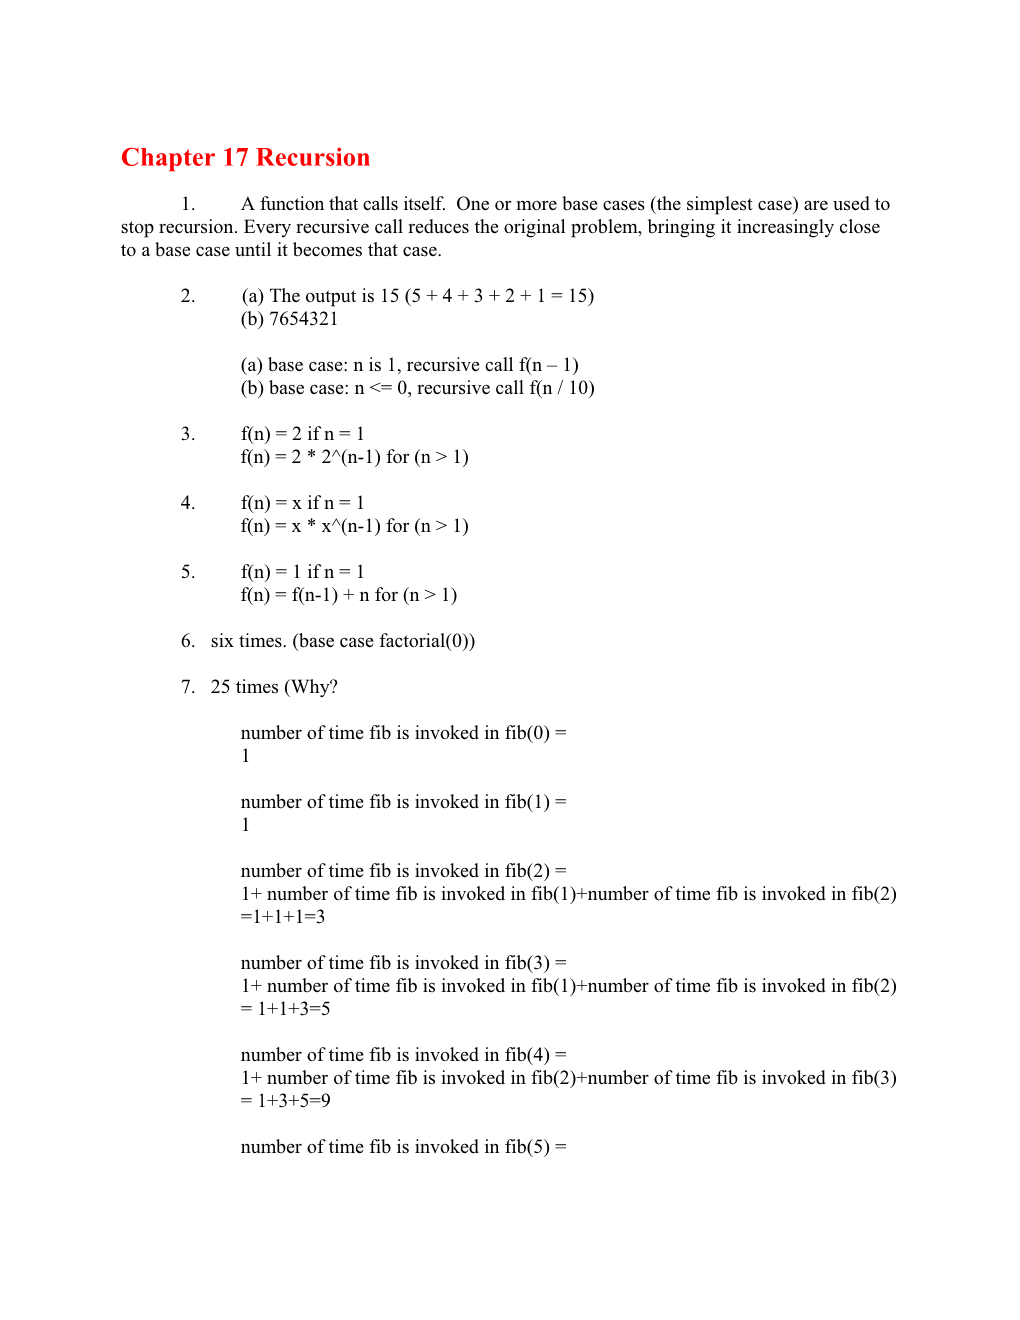 CS 492 Chapter 1 Answers to Odd Questions s6